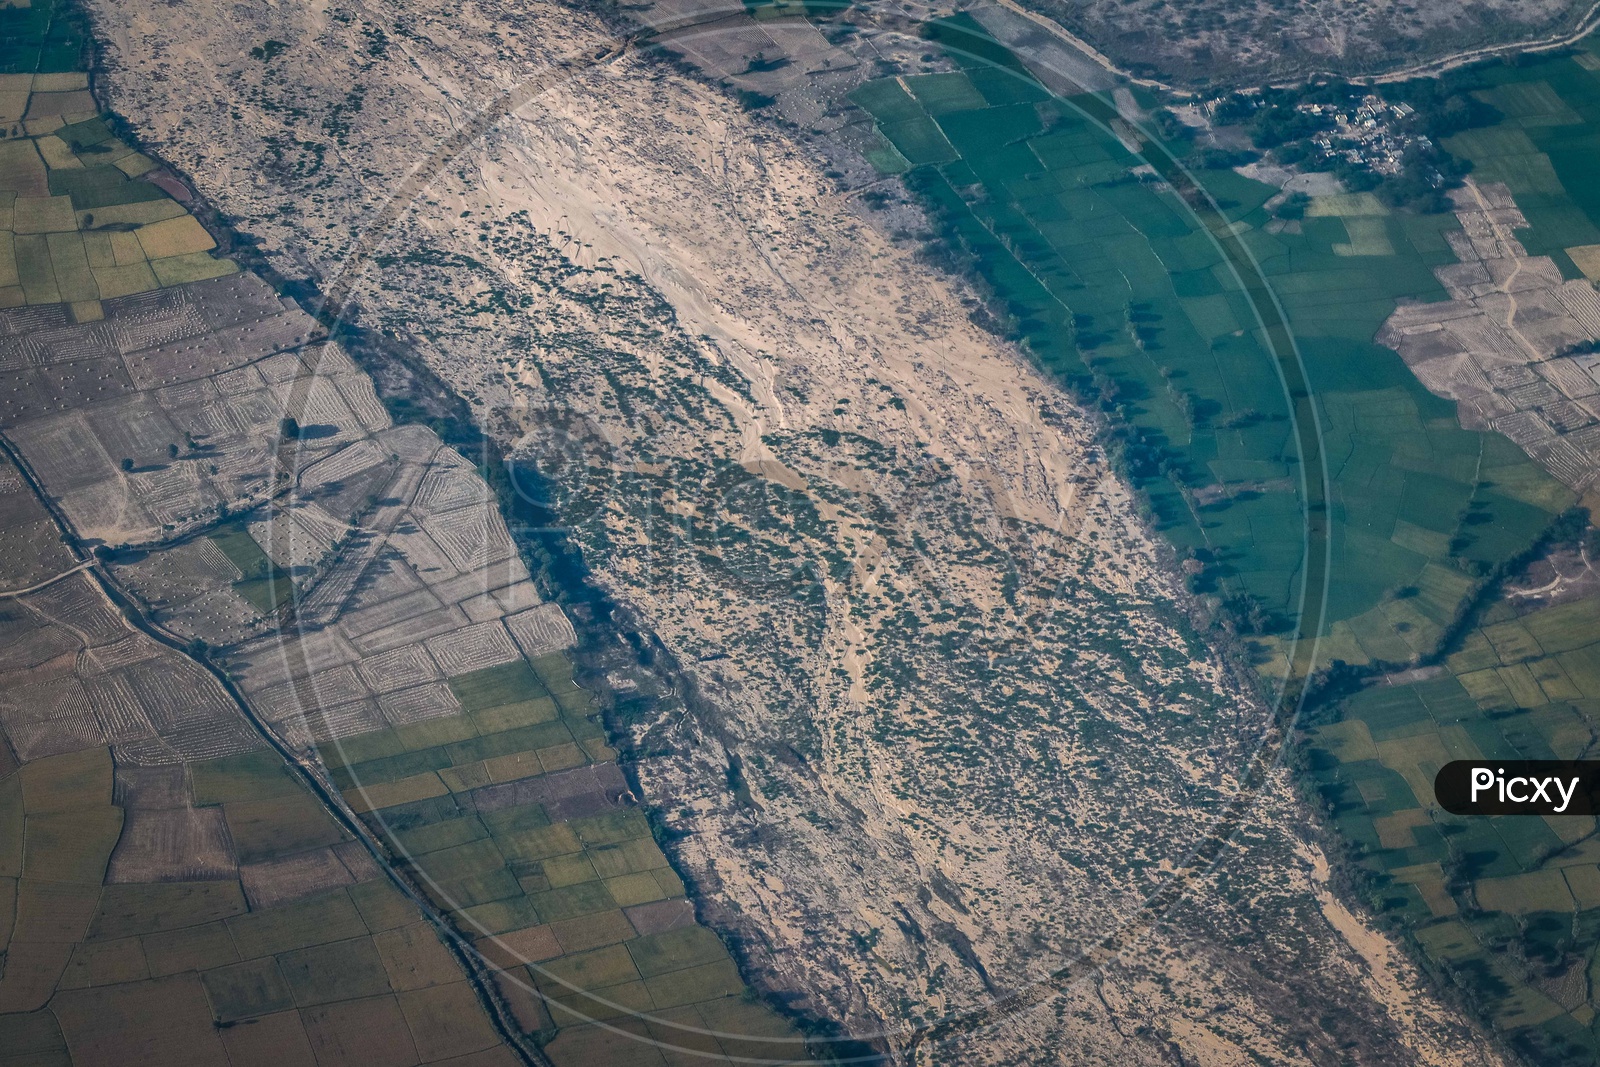 Aerial views of a dried up river and crops around